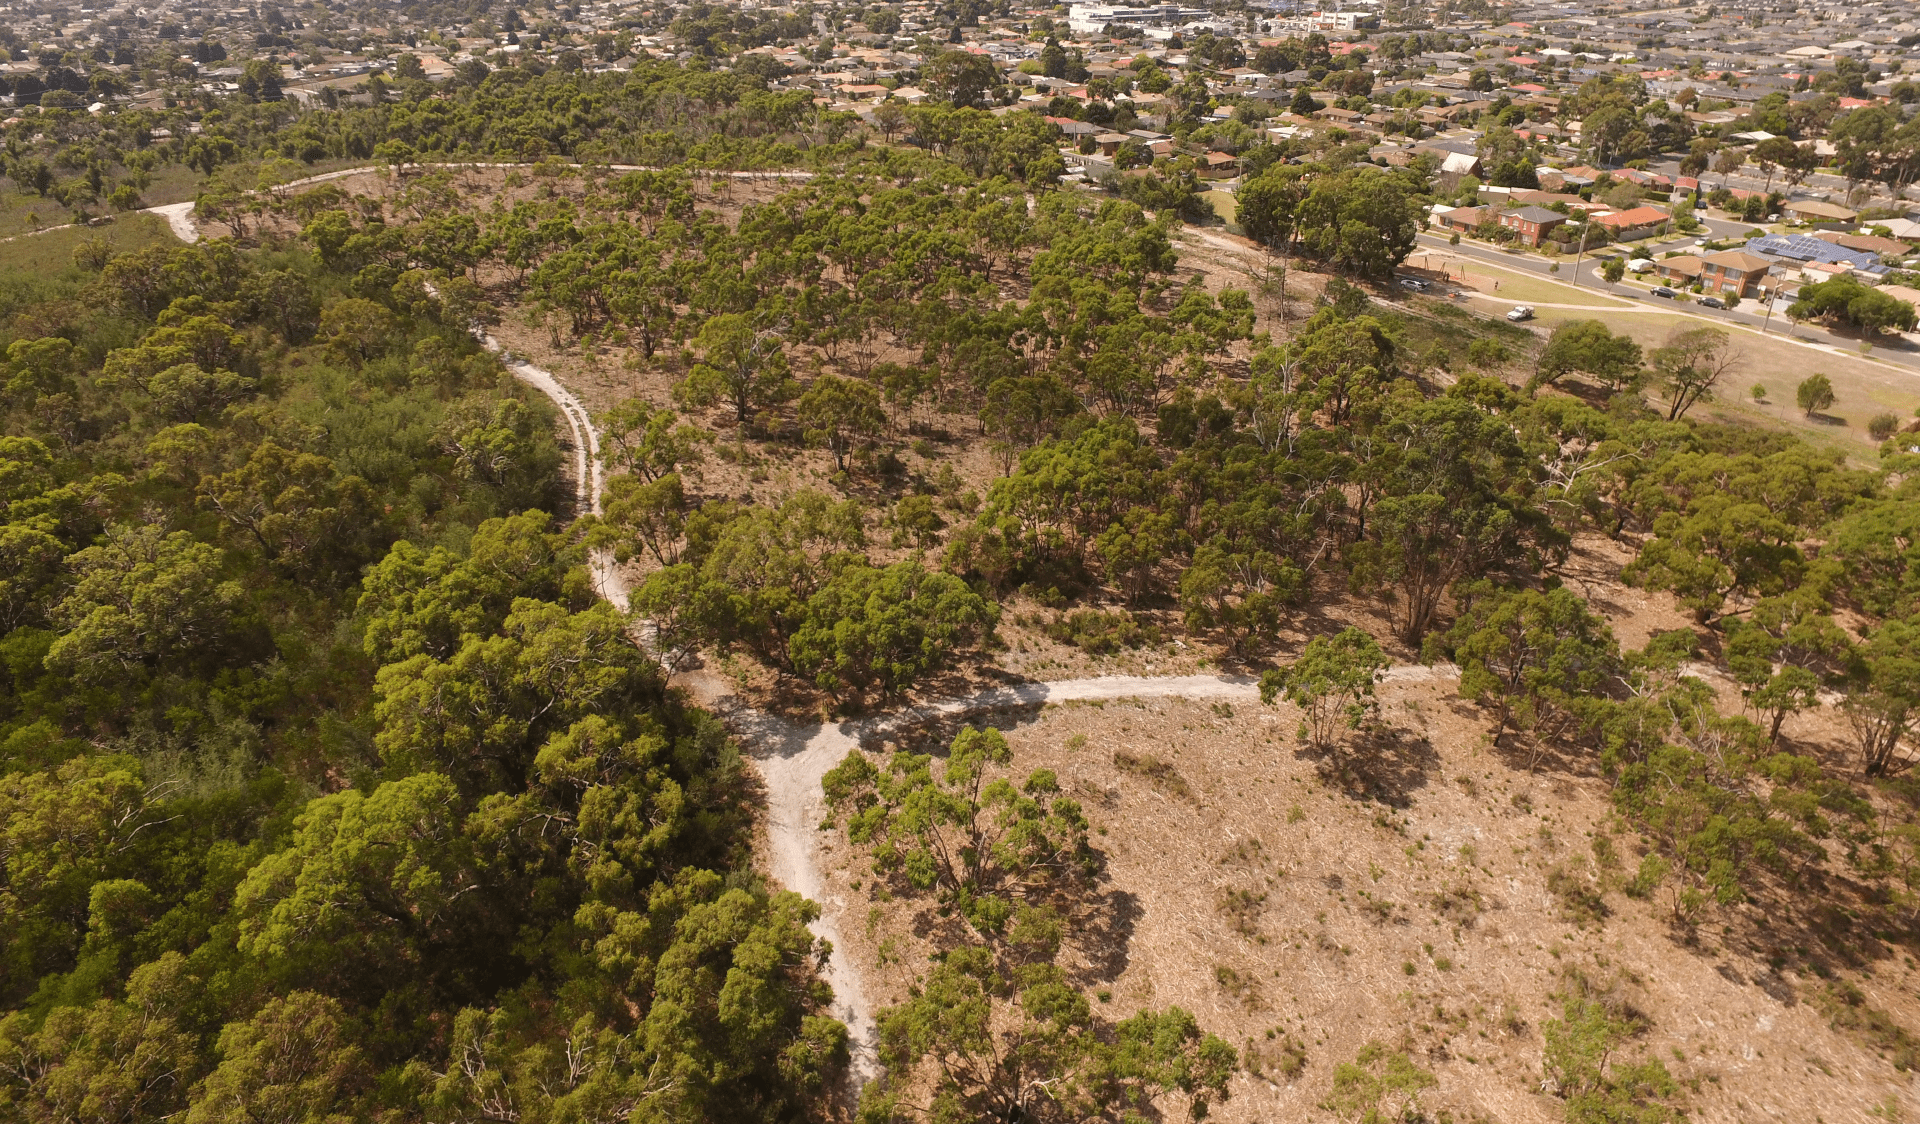 An aerial view of The Pines Flora and Fauna Reserve